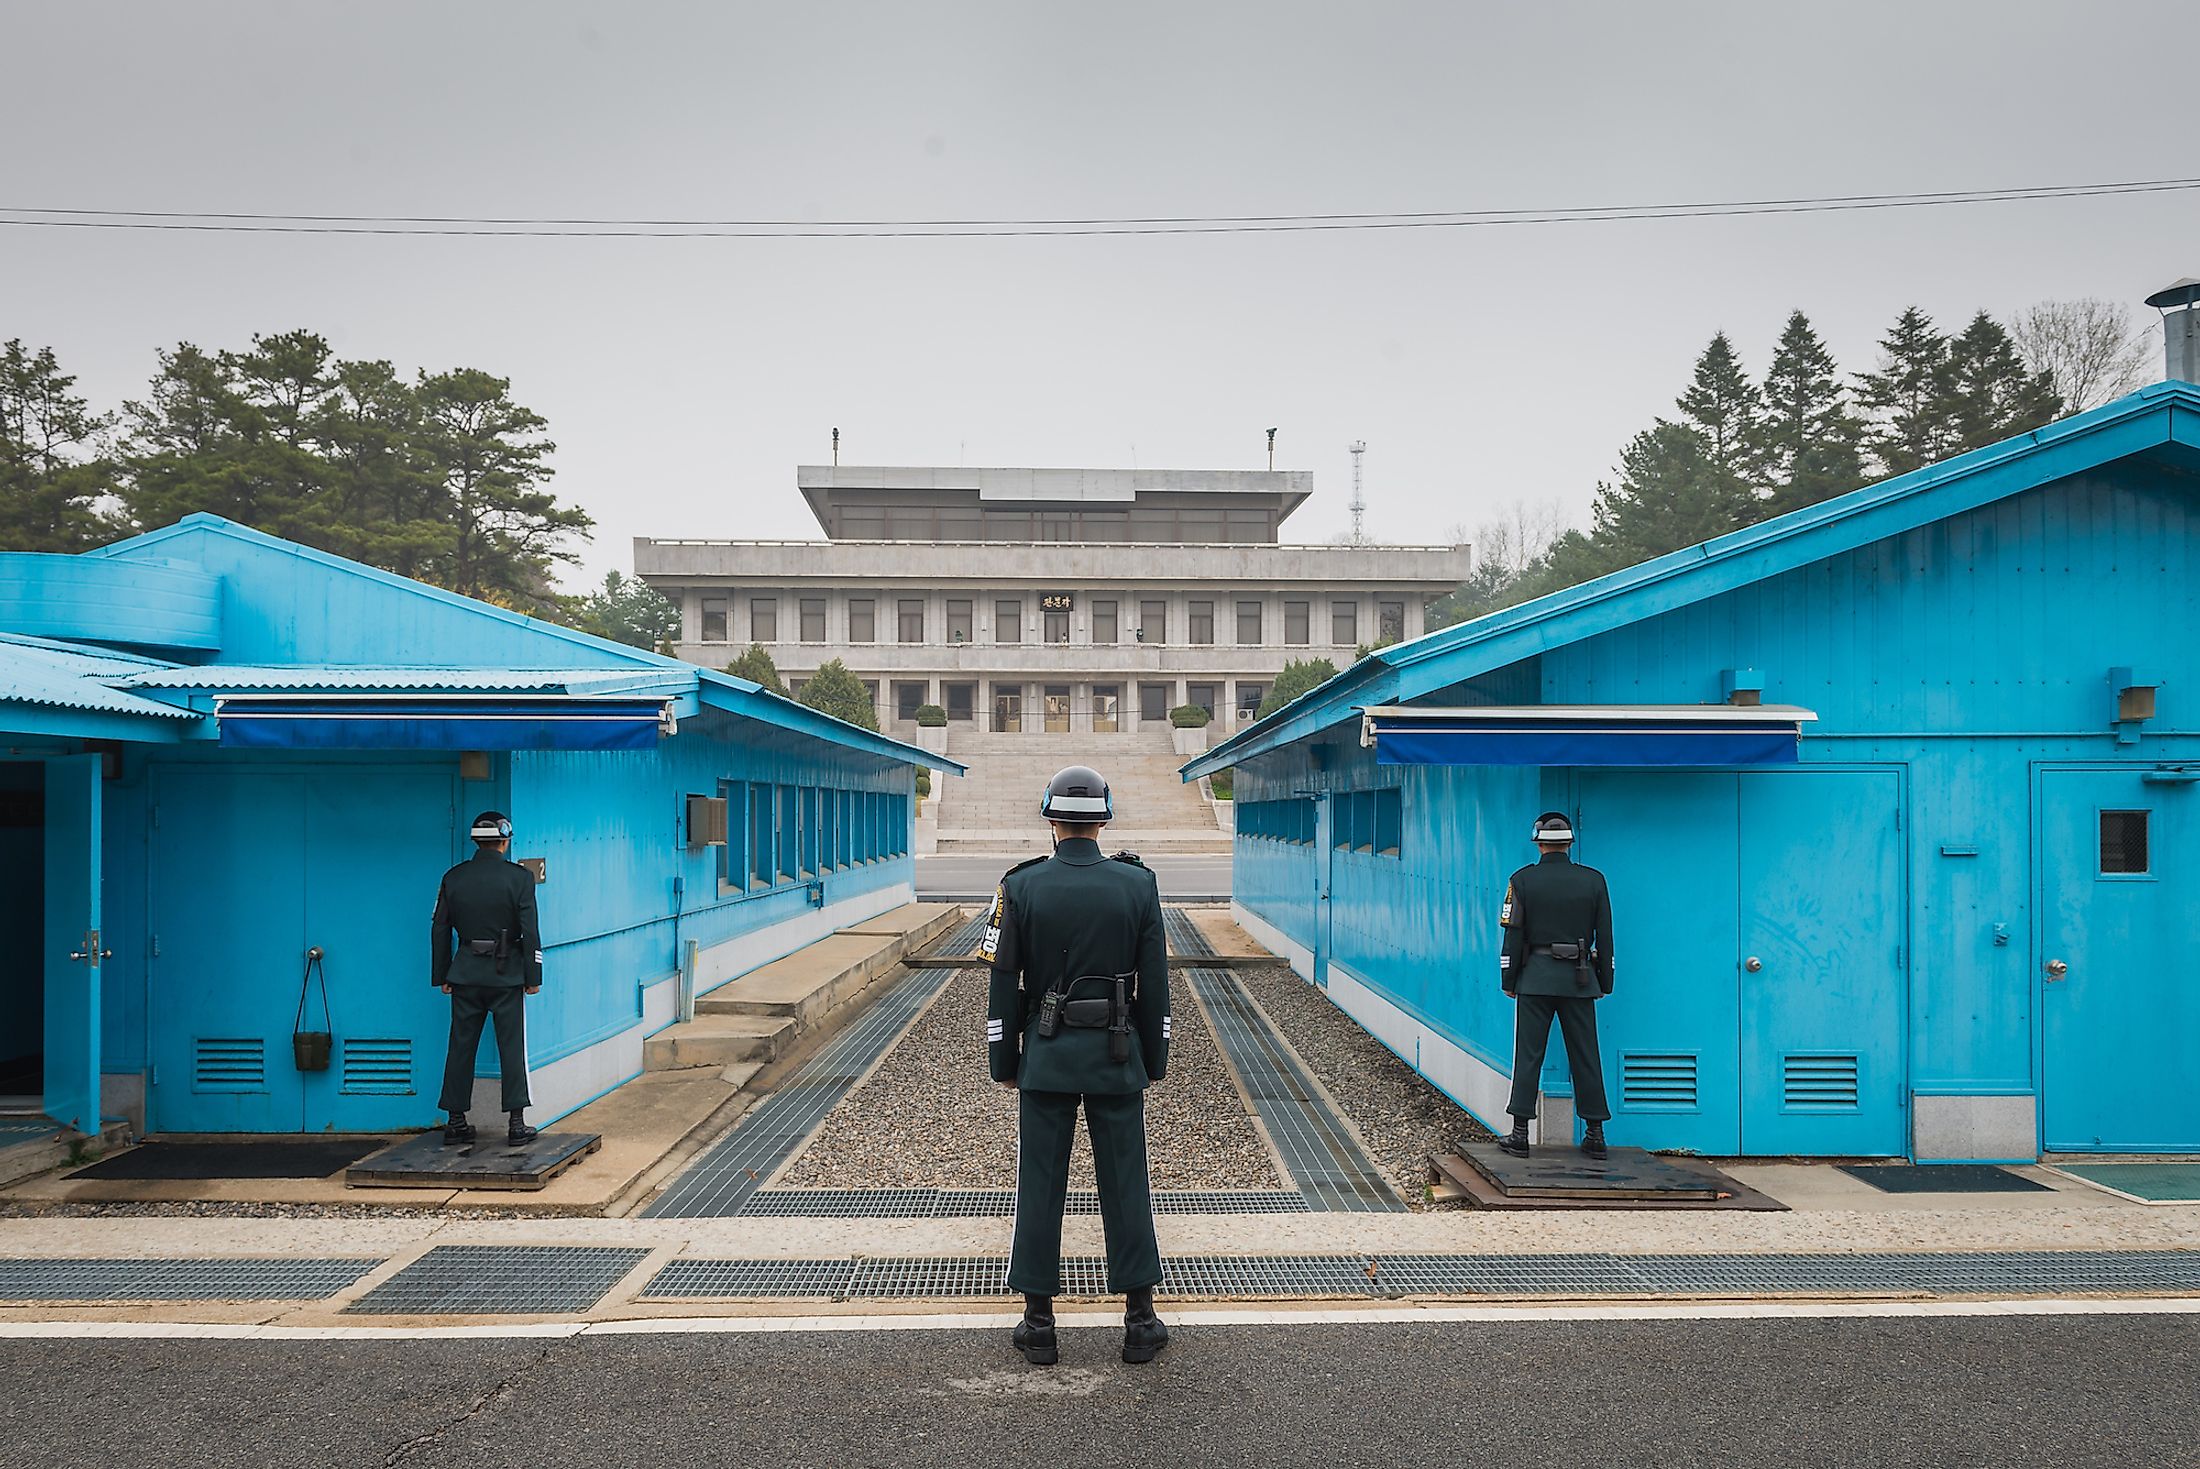 South Korean soldiers stand guard at the Demilitarized Zone on the North Korean border on April 9, 2016 in Panmunjeon, South Korea.